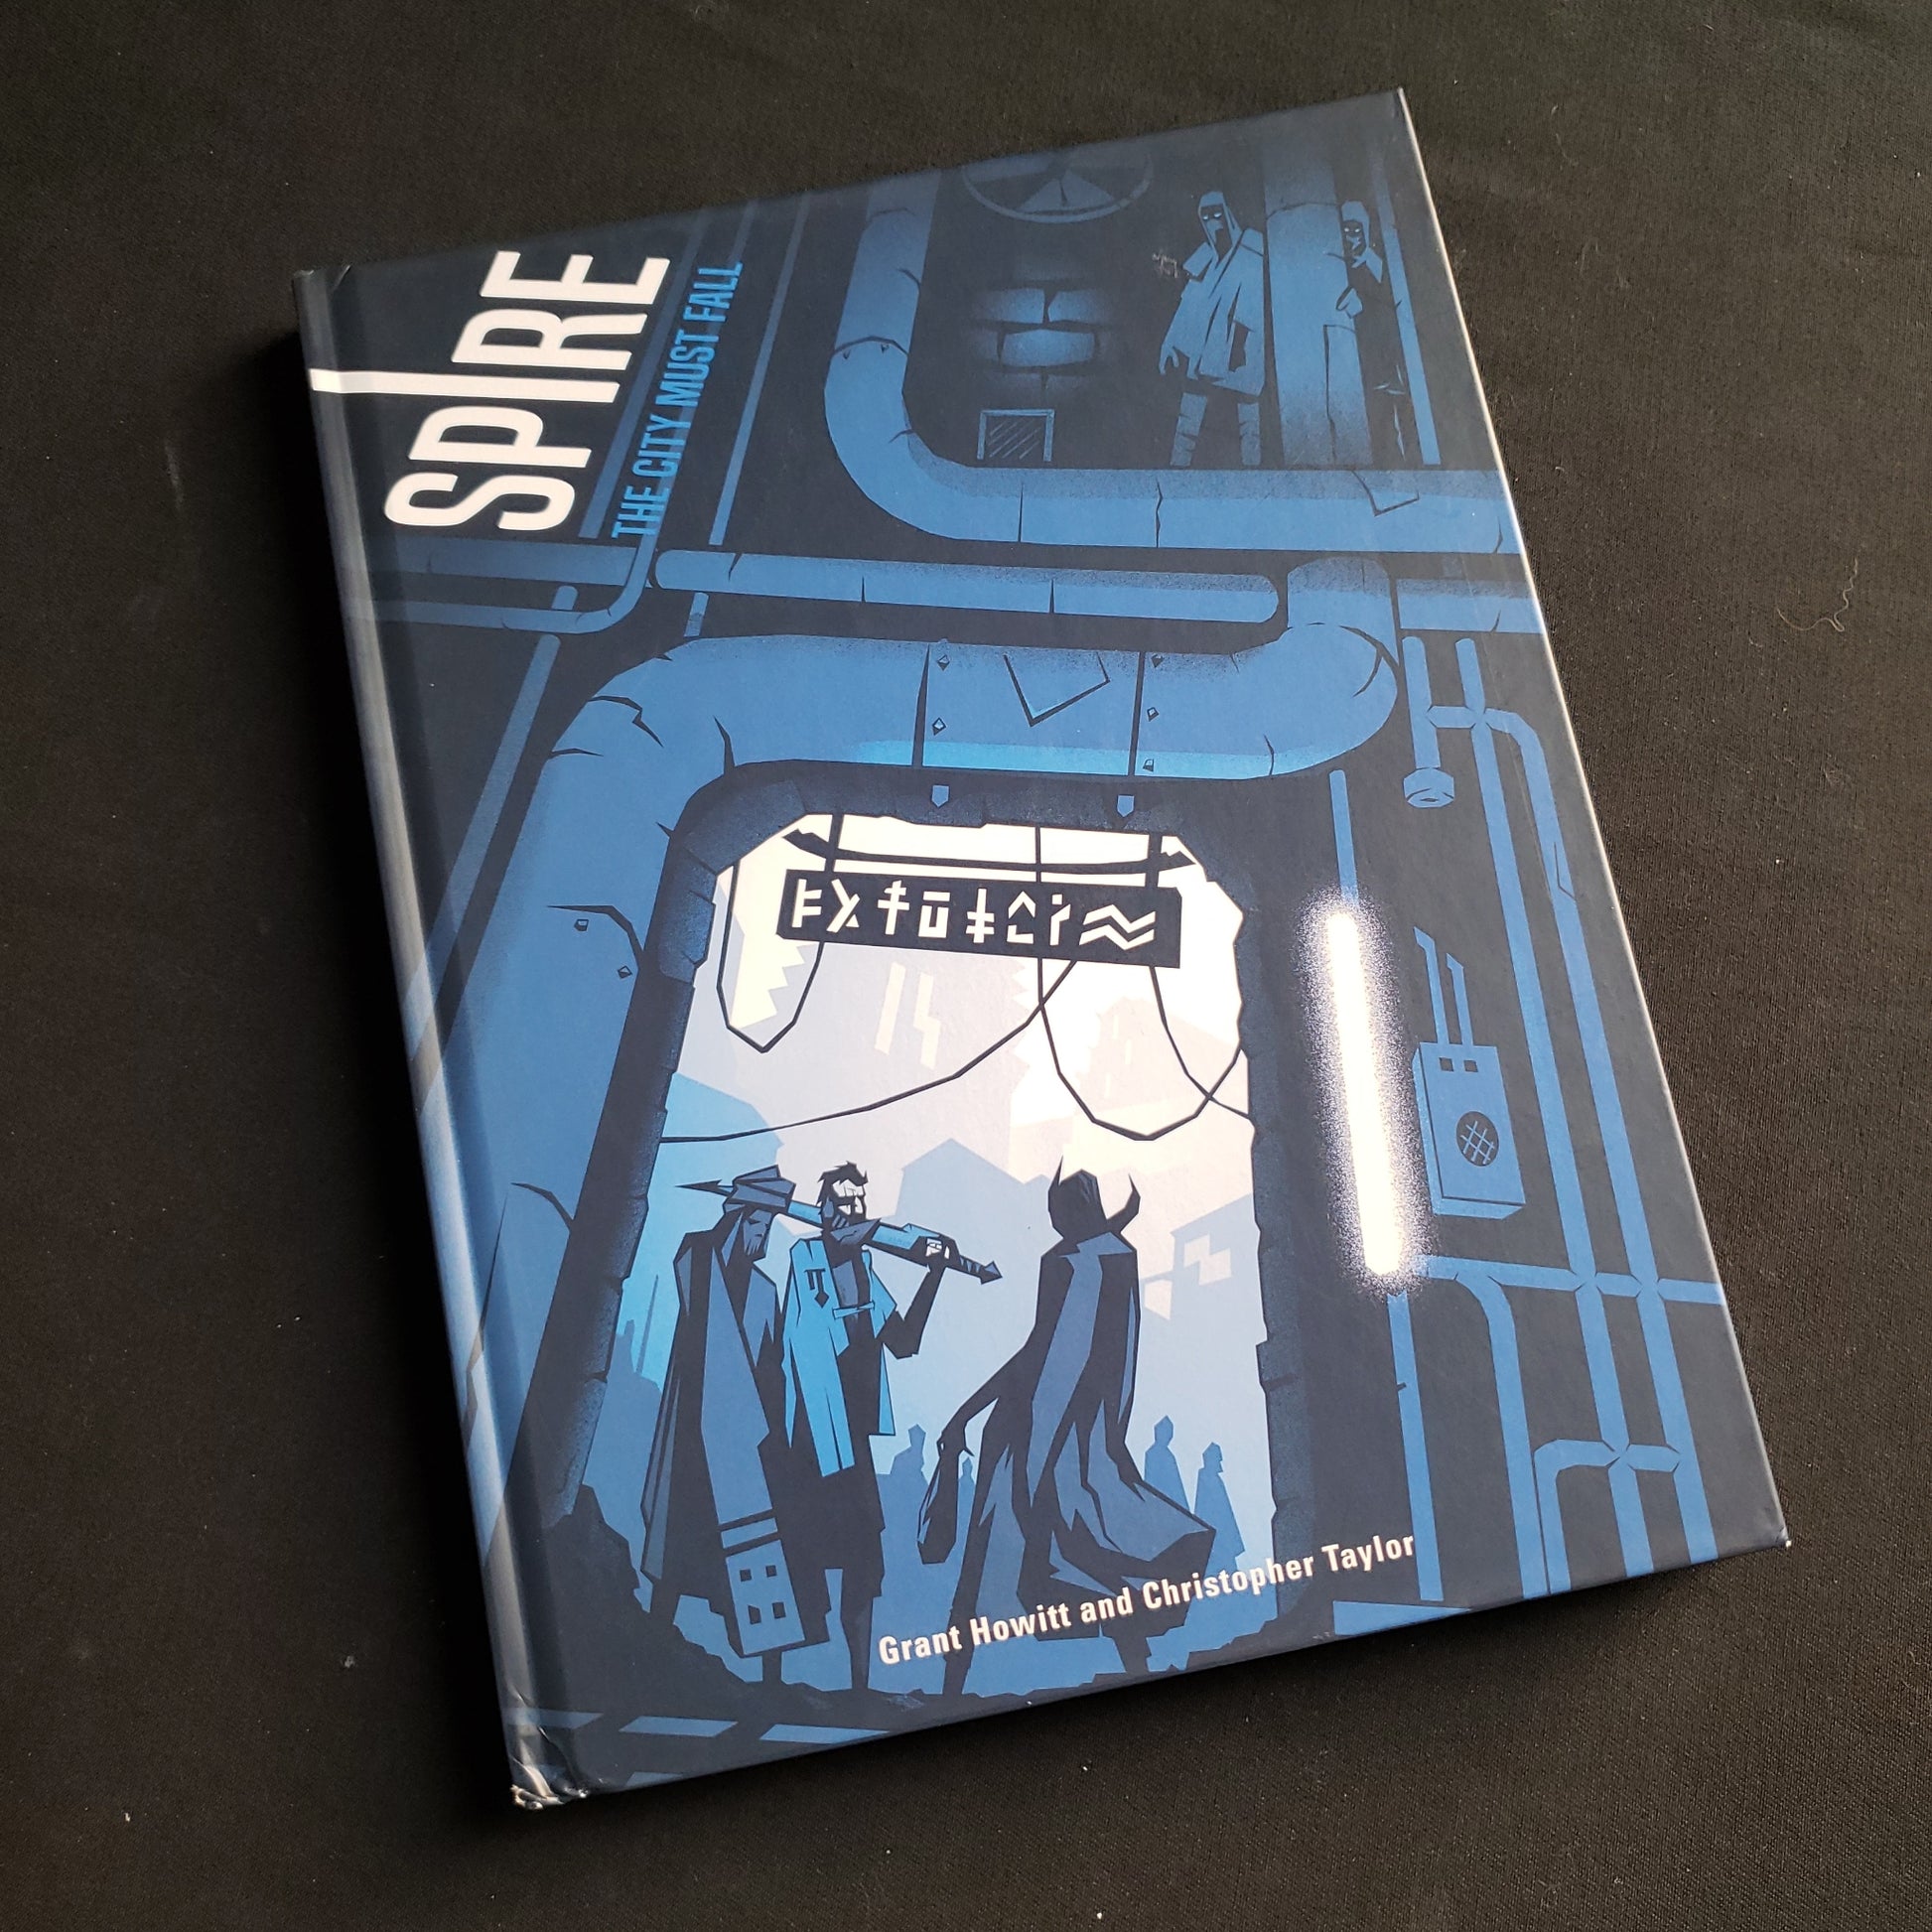 Image shows the front cover of the Spire: The City Must Fall roleplaying game book